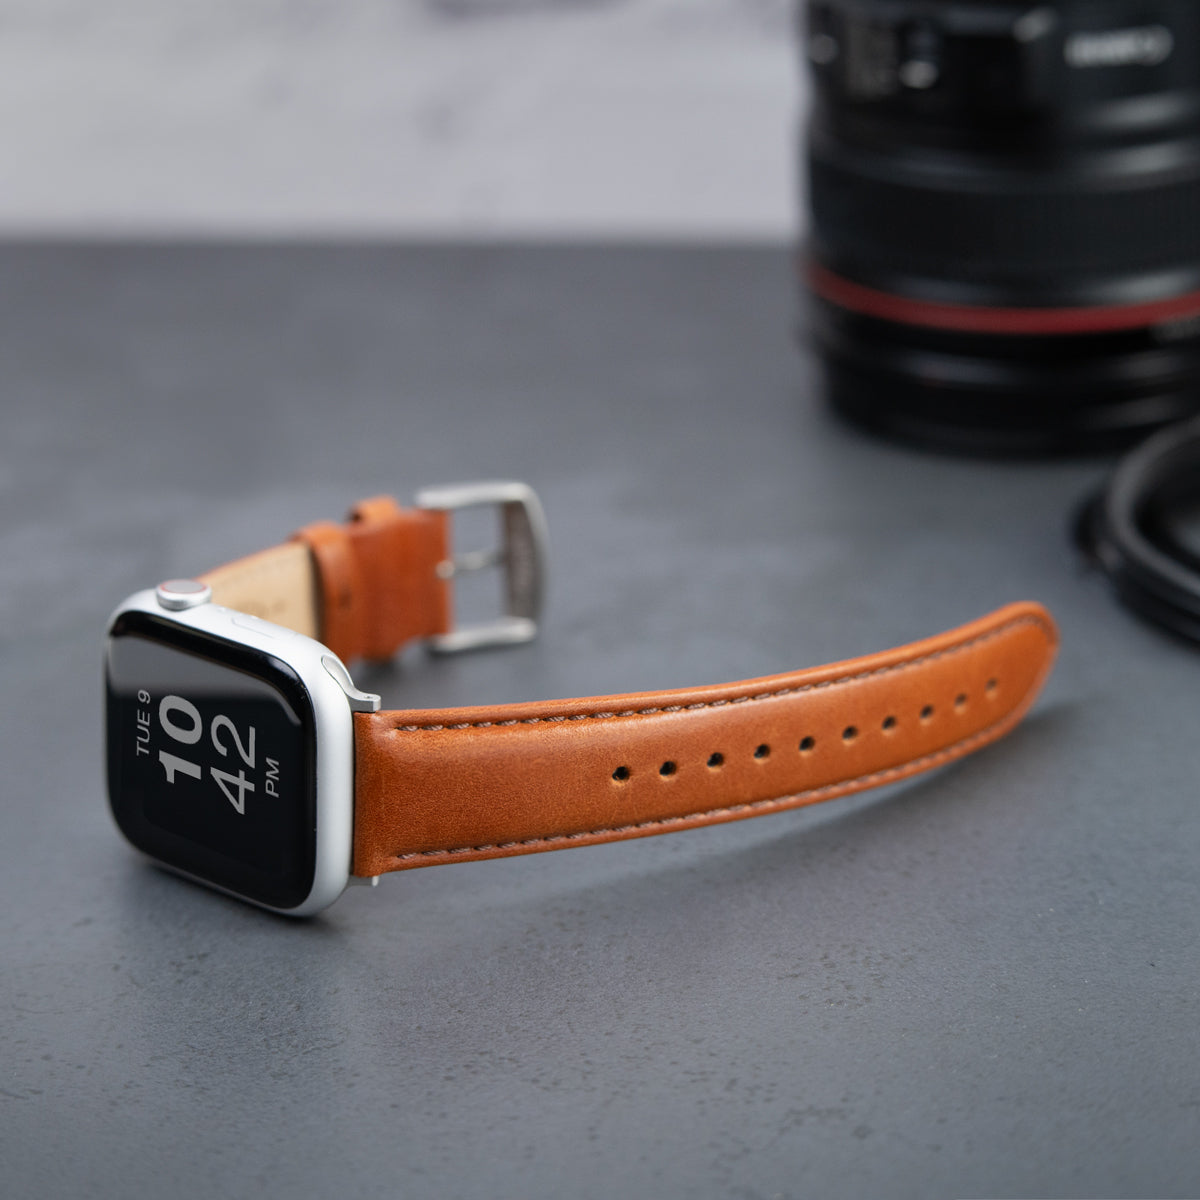 Apple Watch Band - Stainless Steel - Orange Textured Calf Leather